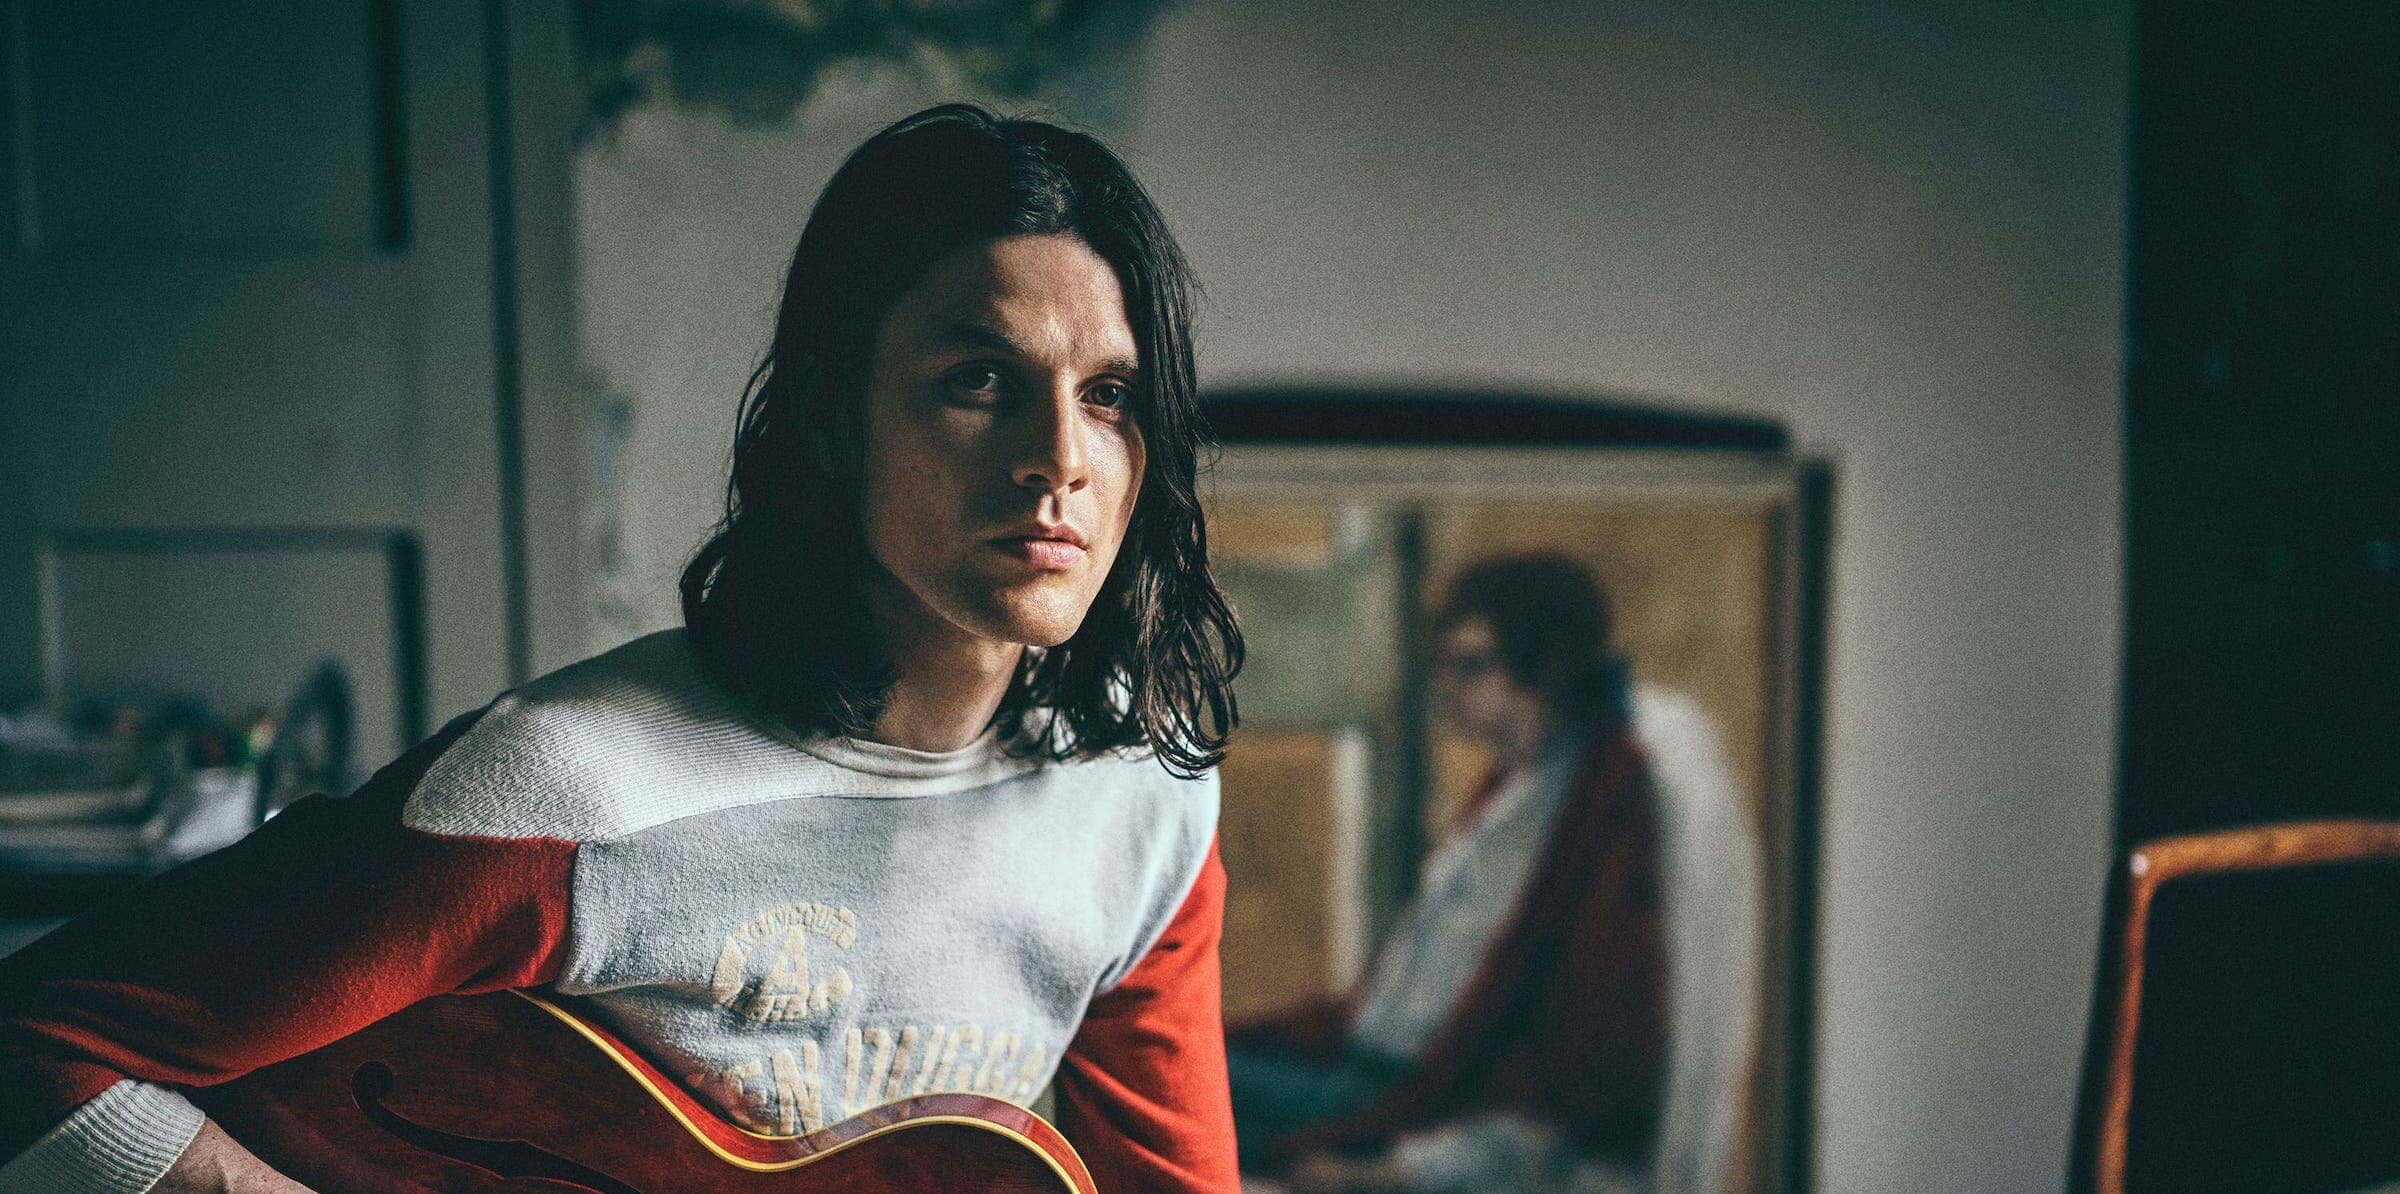 James bay on imposter syndrome, anxiety and why becoming a father will change his music forever